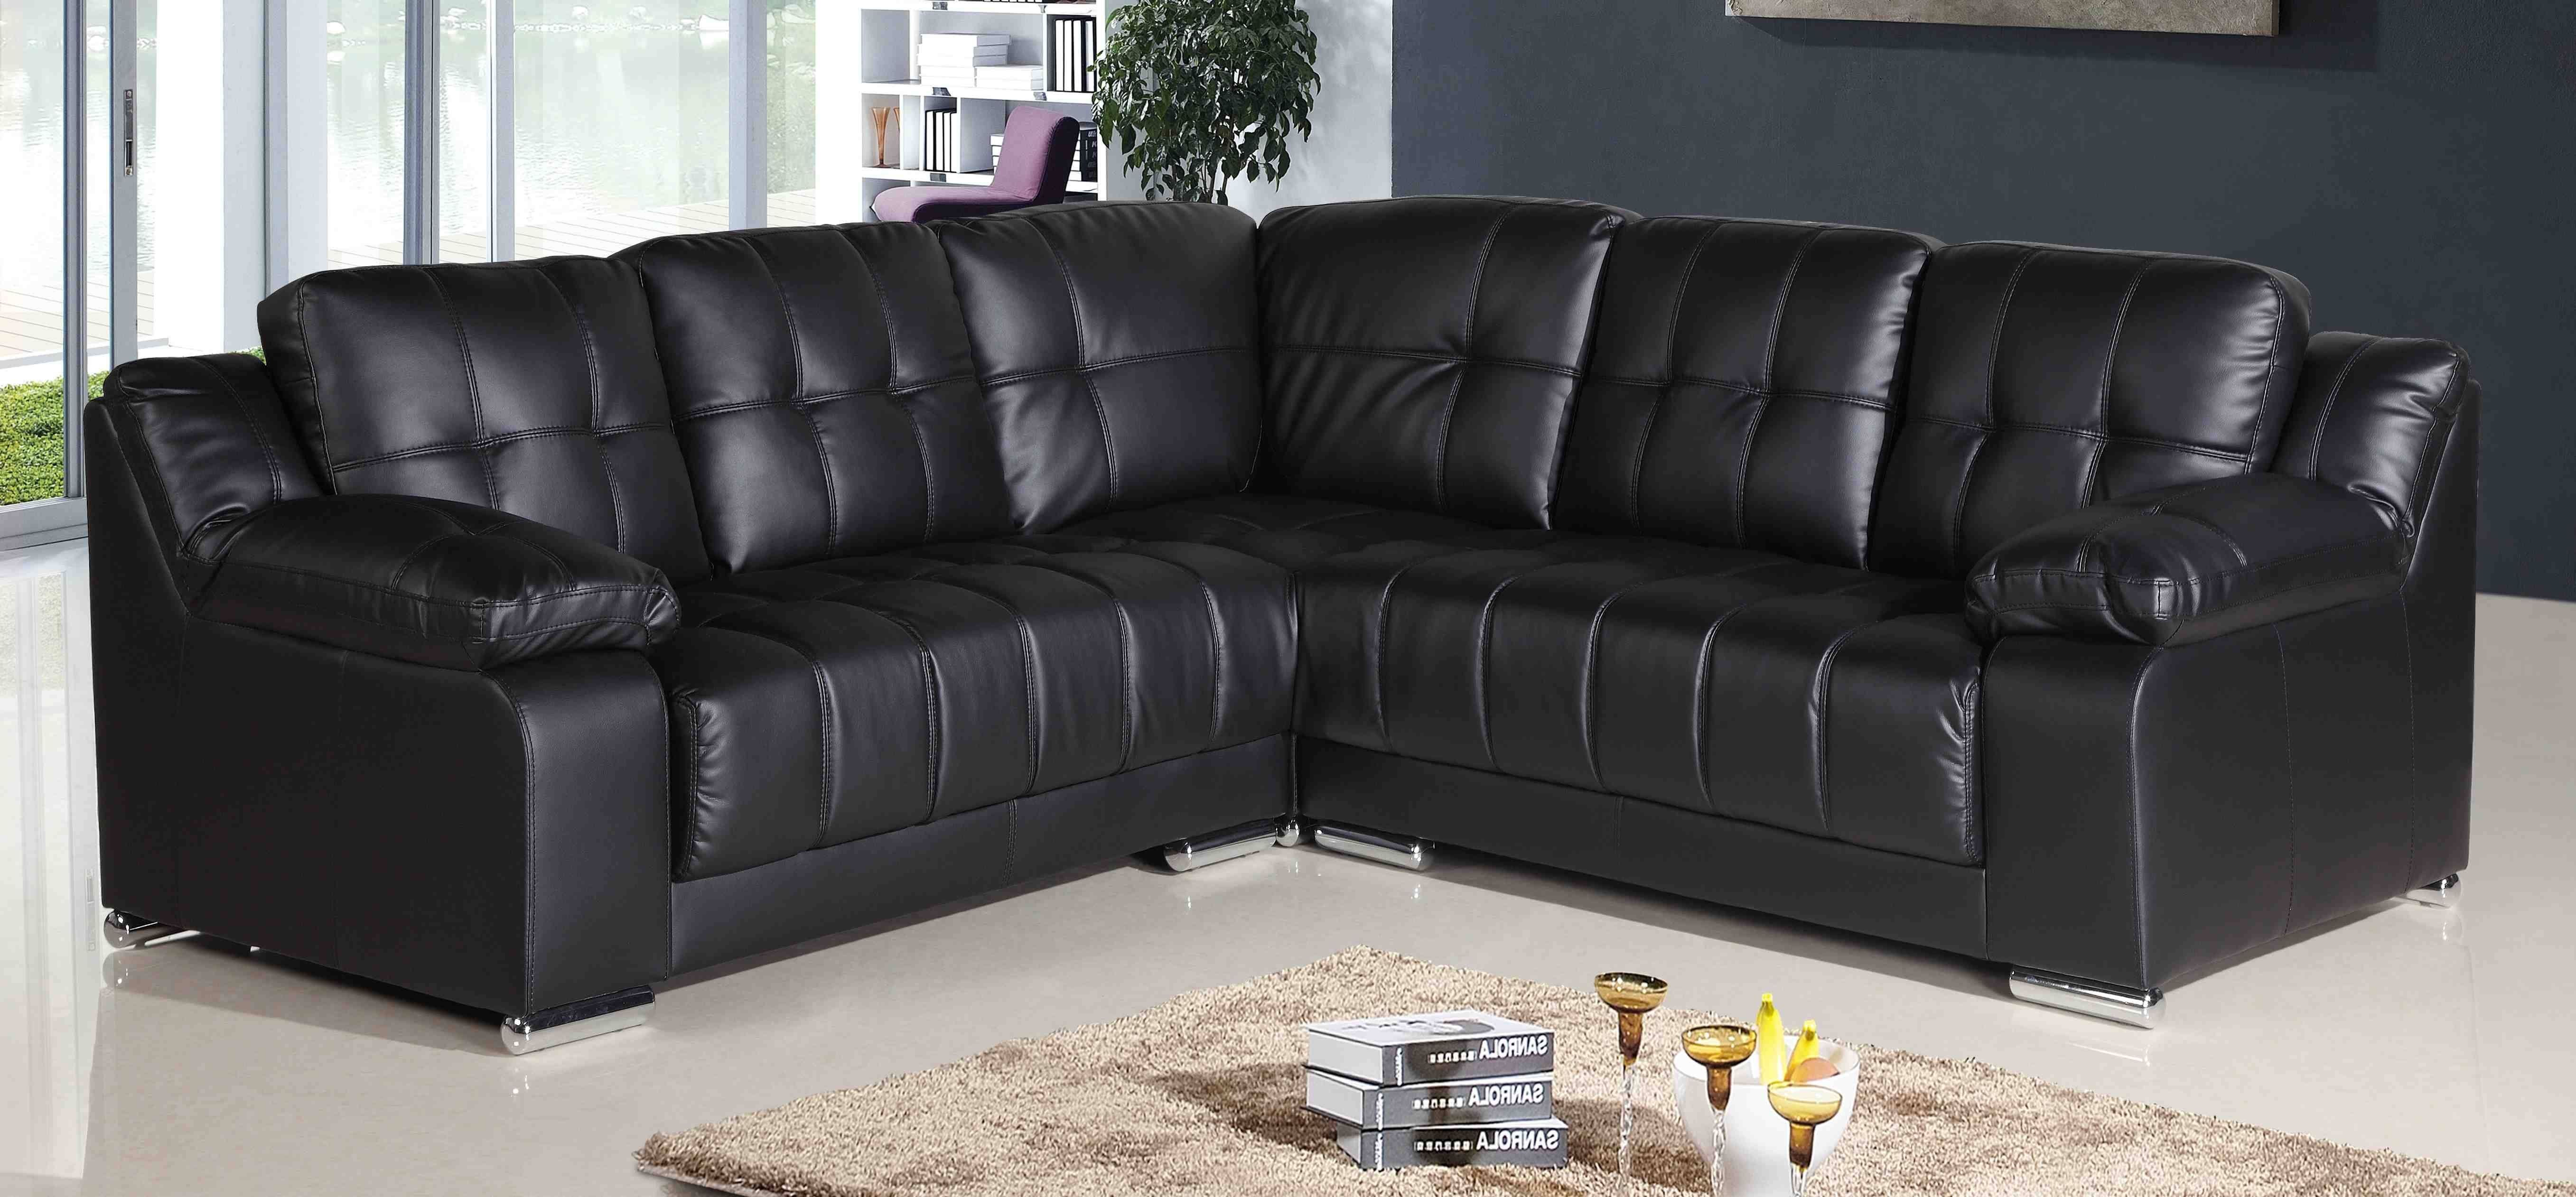 Cheap Leather Corner Sofa For Sale London, Black Leather Sofa Corner Throughout Cheap Corner Sofas (Photo 1 of 30)